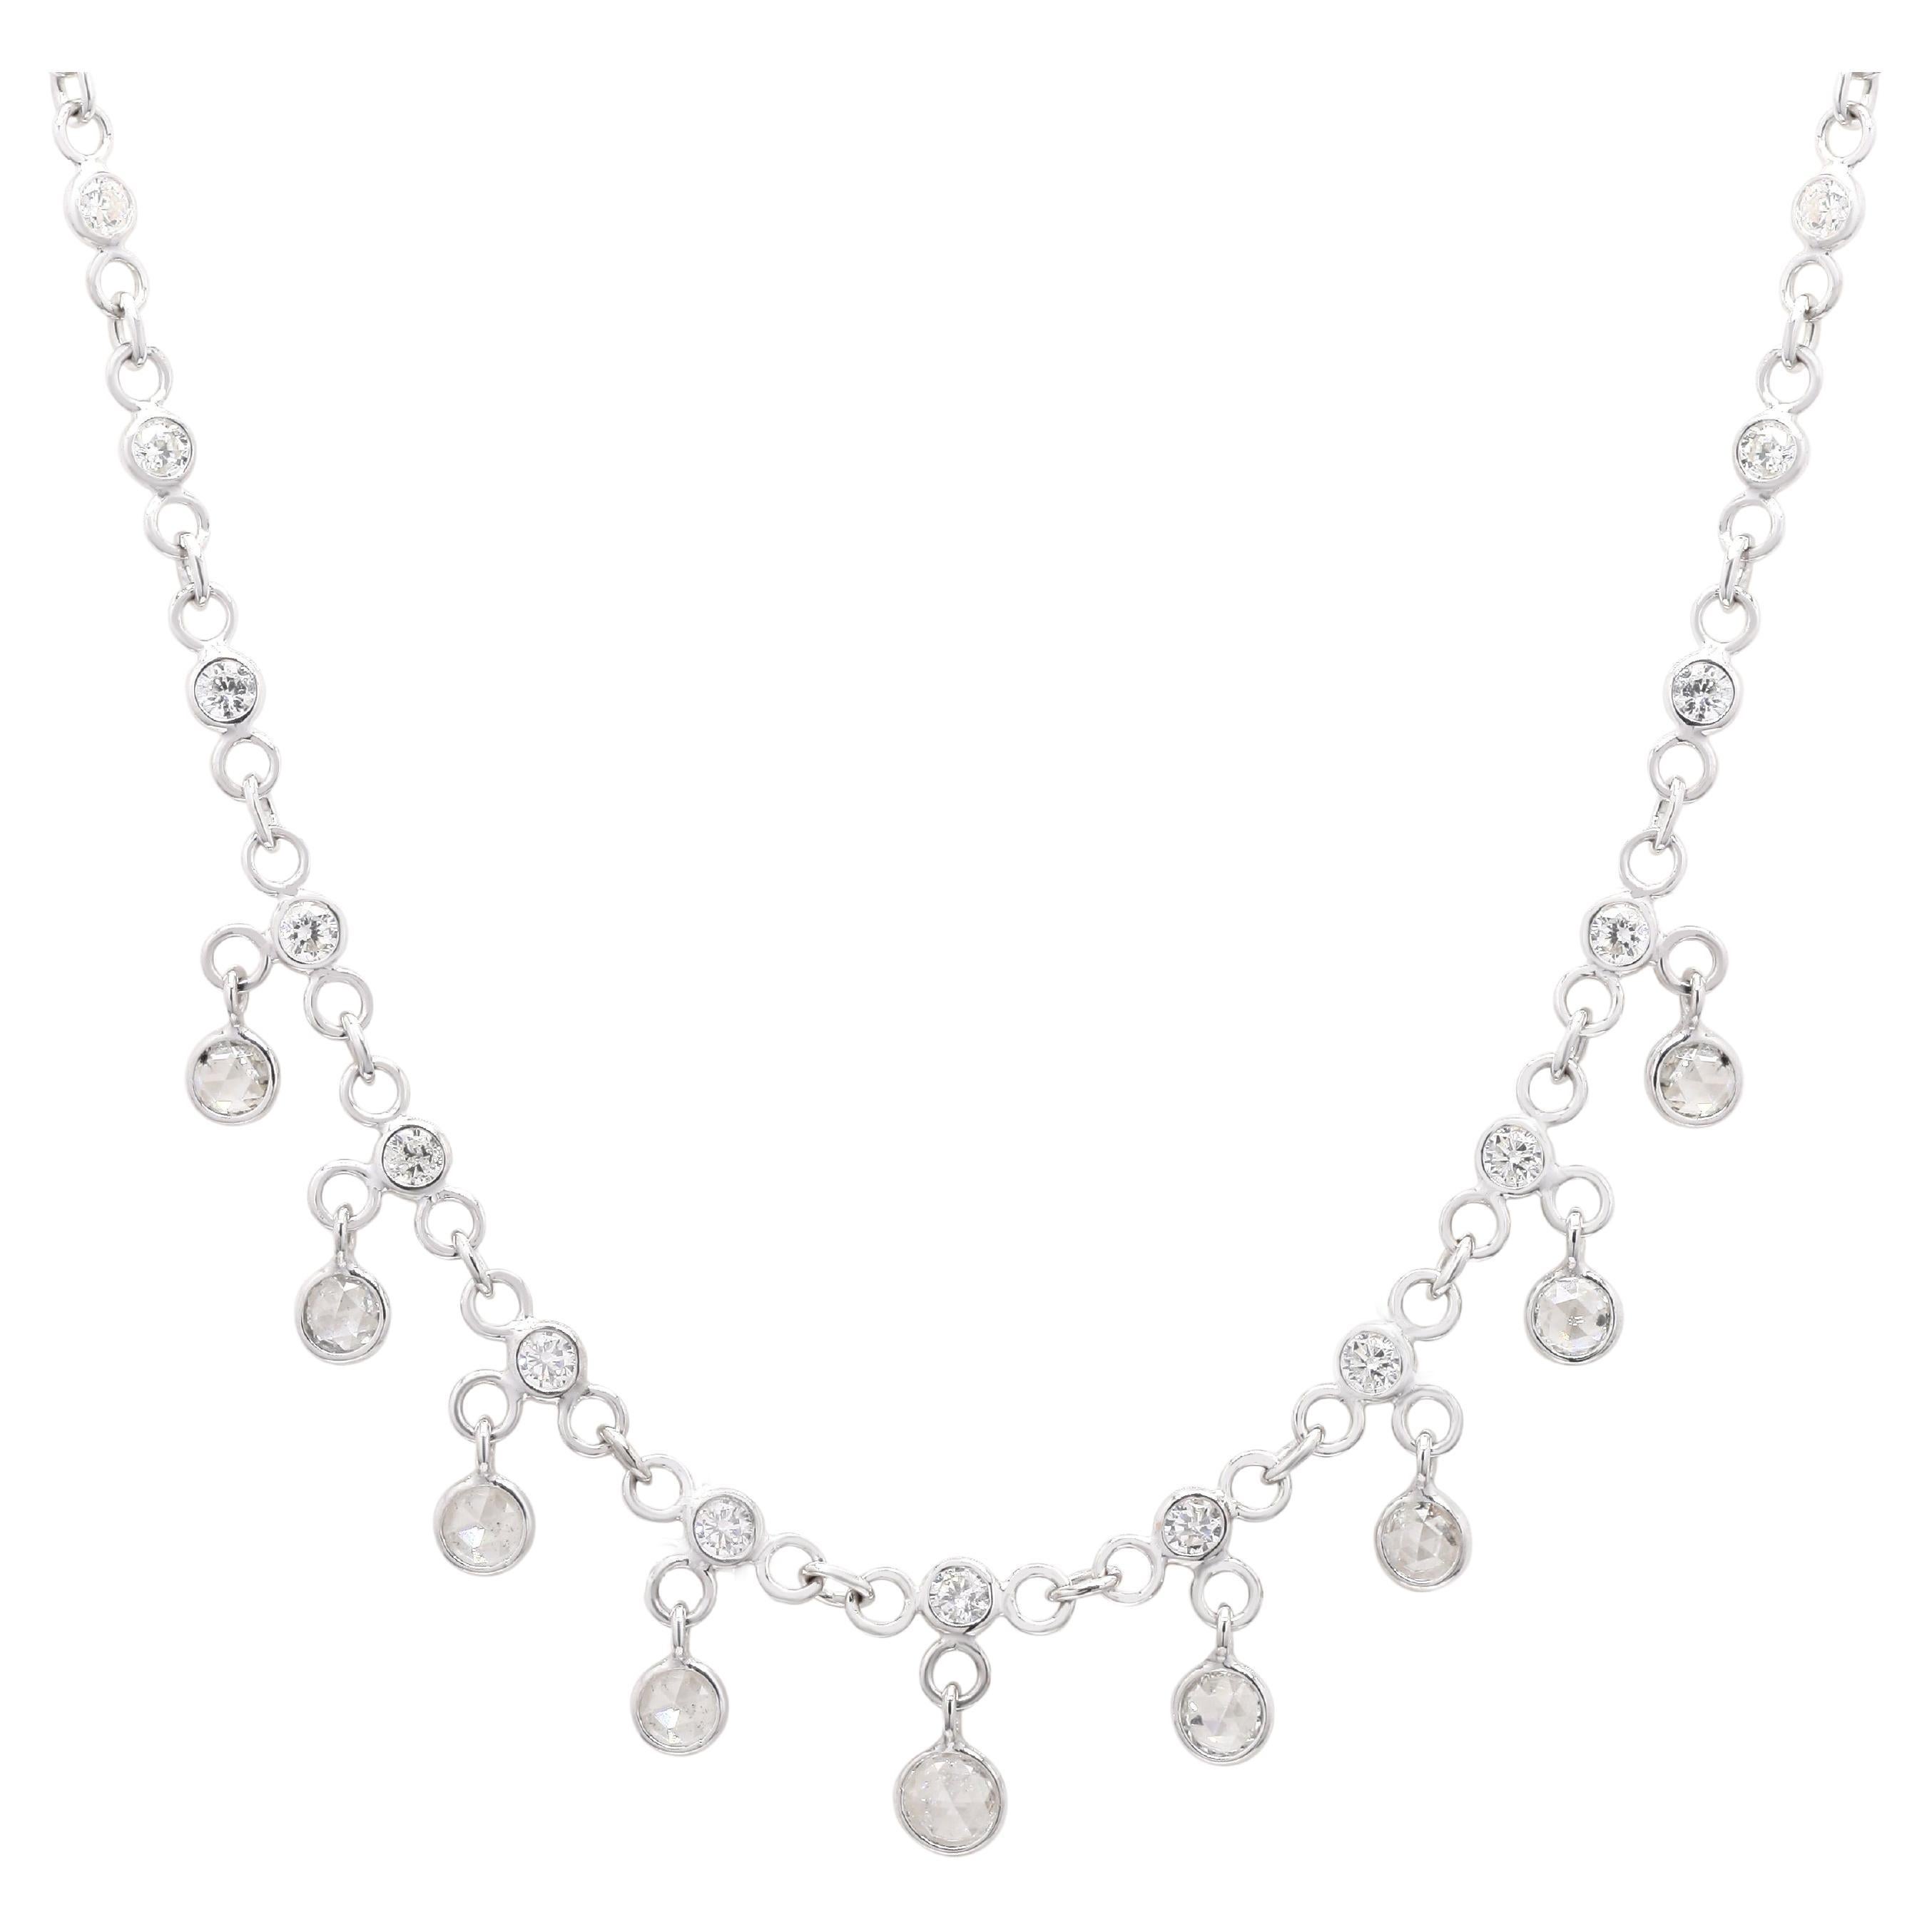 18k White Gold 2.6 Carat Genuine Diamond Chain Necklace, Christmas Gifts For Her For Sale